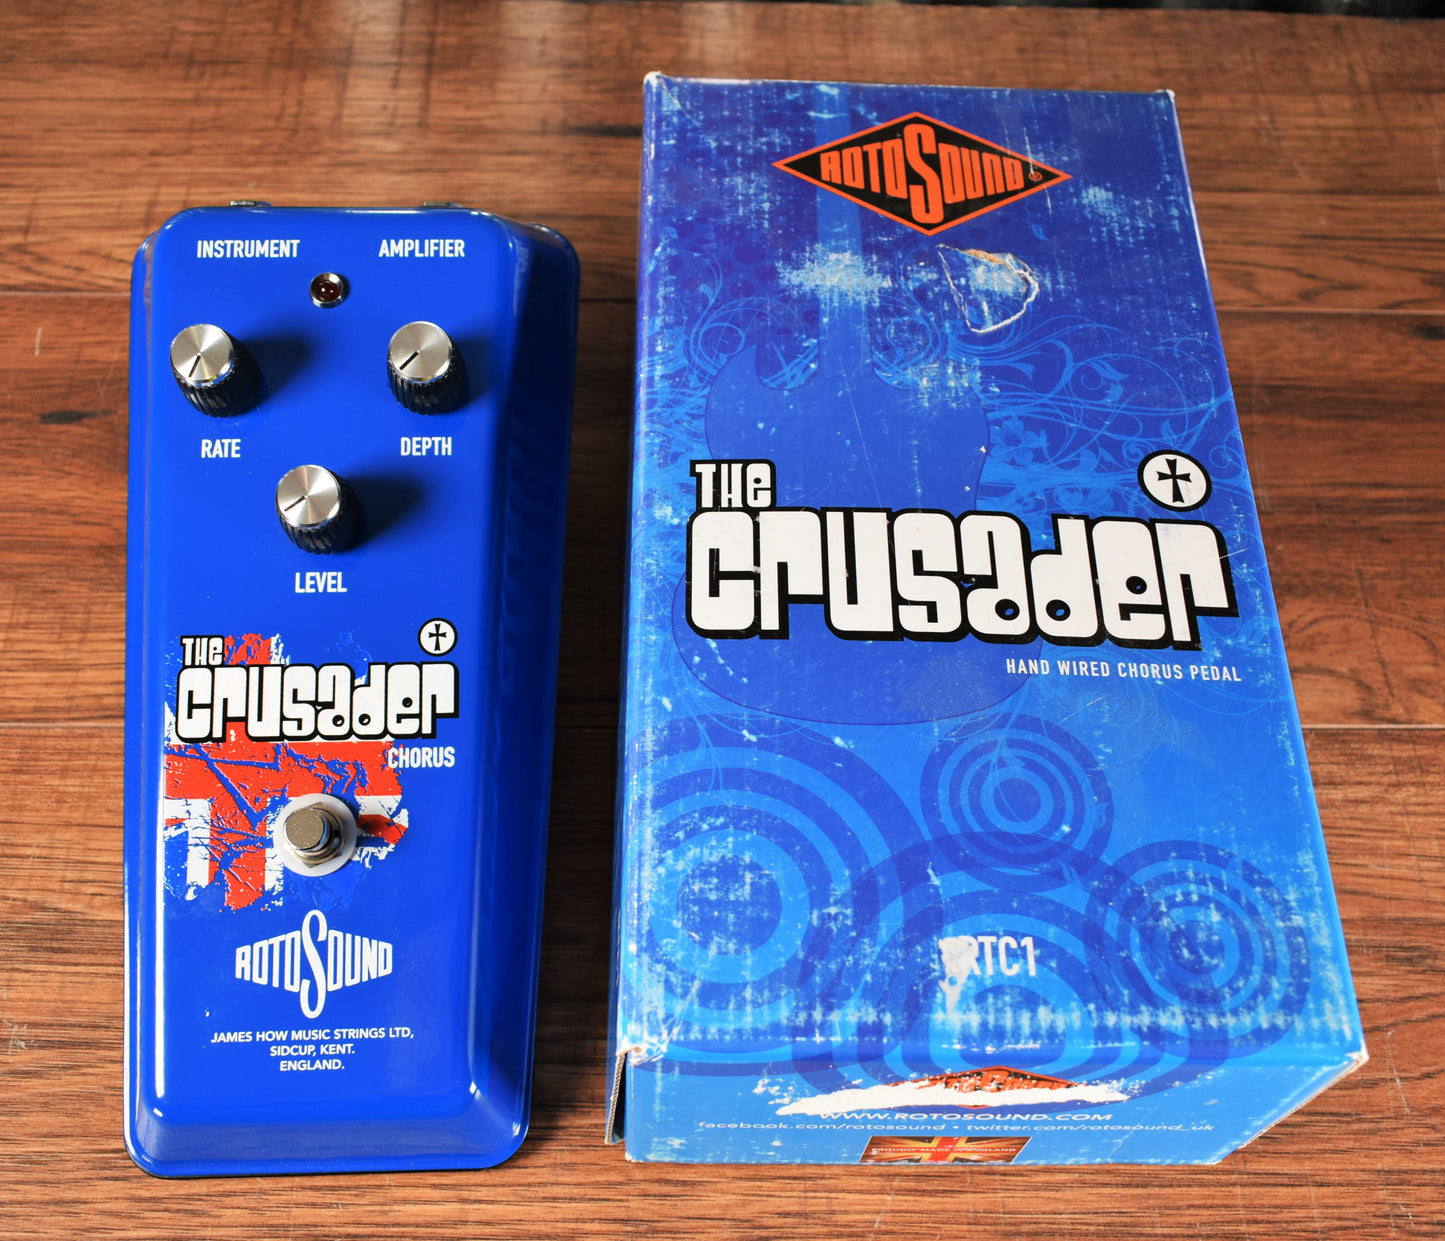 Rotosound The Crusader RTC1 Chorus Hand Built Vintage Style Guitar Effect Pedal Non Functioning